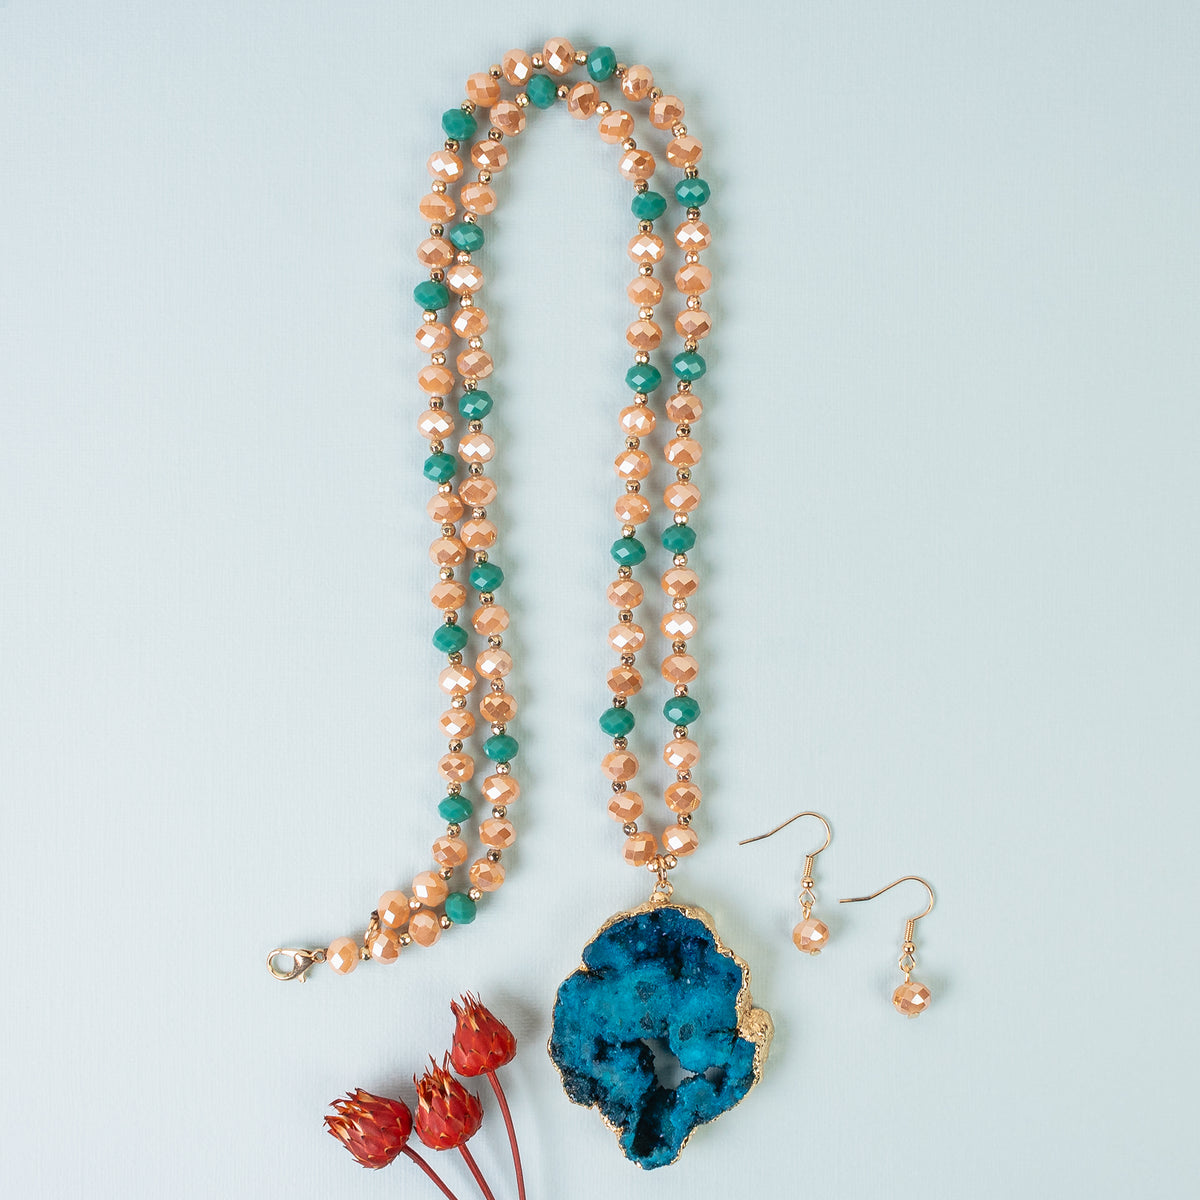 72977 - Natural Stone Necklace - Turquoise